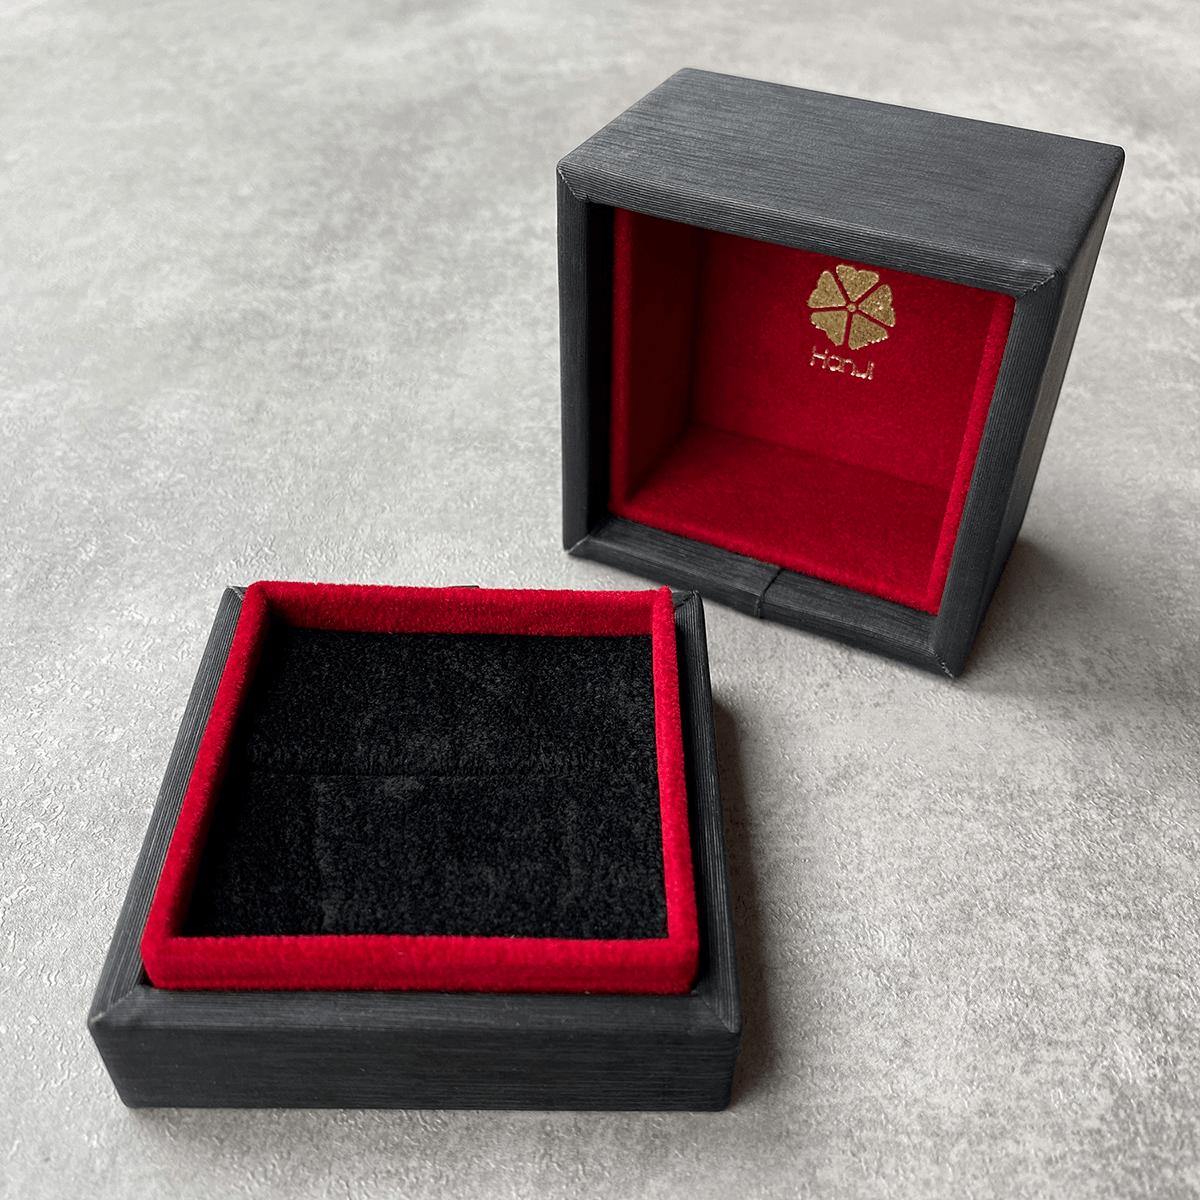 Luxury black and red jewelry box necklace box earring box ring box